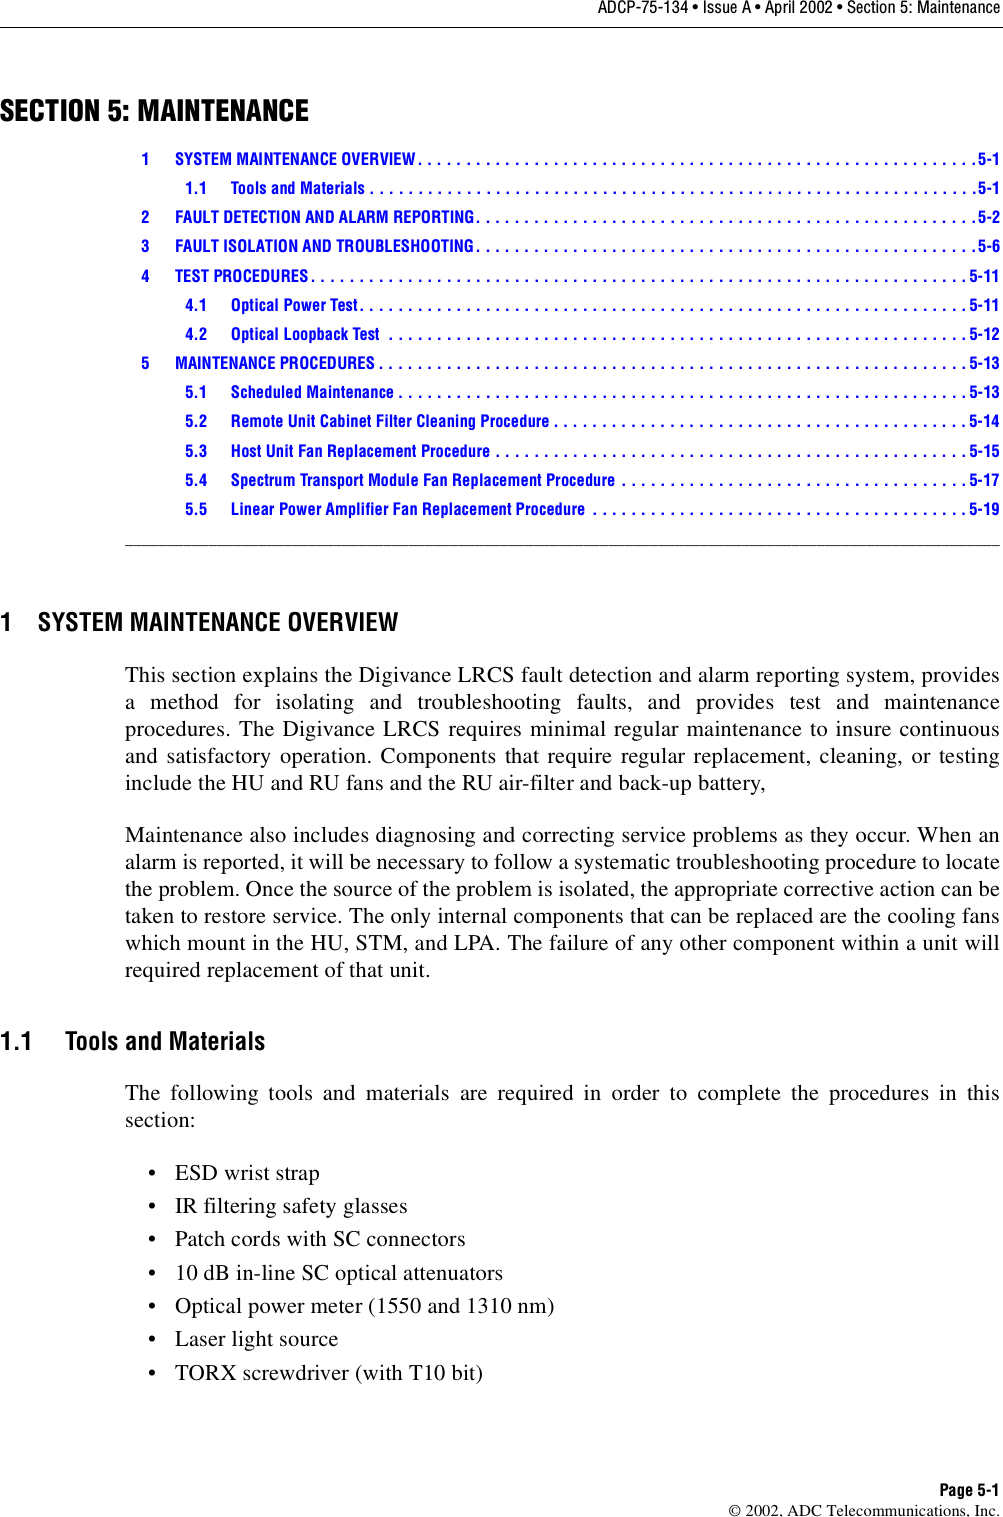 ADCP-75-134 • Issue A • April 2002 • Section 5: MaintenancePage 5-1©2002, ADC Telecommunications, Inc.SECTION 5: MAINTENANCE1 SYSTEM MAINTENANCE OVERVIEW . . . . . . . . . . . . . . . . . . . . . . . . . . . . . . . . . . . . . . . . . . . . . . . . . . . . . . . . . .5-11.1 Tools and Materials . . . . . . . . . . . . . . . . . . . . . . . . . . . . . . . . . . . . . . . . . . . . . . . . . . . . . . . . . . . . . . .5-12 FAULT DETECTION AND ALARM REPORTING. . . . . . . . . . . . . . . . . . . . . . . . . . . . . . . . . . . . . . . . . . . . . . . . . . . .5-23 FAULT ISOLATION AND TROUBLESHOOTING. . . . . . . . . . . . . . . . . . . . . . . . . . . . . . . . . . . . . . . . . . . . . . . . . . . .5-64 TEST PROCEDURES. . . . . . . . . . . . . . . . . . . . . . . . . . . . . . . . . . . . . . . . . . . . . . . . . . . . . . . . . . . . . . . . . . . . 5-114.1 Optical Power Test. . . . . . . . . . . . . . . . . . . . . . . . . . . . . . . . . . . . . . . . . . . . . . . . . . . . . . . . . . . . . . . 5-114.2 Optical Loopback Test  . . . . . . . . . . . . . . . . . . . . . . . . . . . . . . . . . . . . . . . . . . . . . . . . . . . . . . . . . . . . 5-125 MAINTENANCE PROCEDURES . . . . . . . . . . . . . . . . . . . . . . . . . . . . . . . . . . . . . . . . . . . . . . . . . . . . . . . . . . . . . 5-135.1 Scheduled Maintenance . . . . . . . . . . . . . . . . . . . . . . . . . . . . . . . . . . . . . . . . . . . . . . . . . . . . . . . . . . . 5-135.2 Remote Unit Cabinet Filter Cleaning Procedure . . . . . . . . . . . . . . . . . . . . . . . . . . . . . . . . . . . . . . . . . . . 5-145.3 Host Unit Fan Replacement Procedure . . . . . . . . . . . . . . . . . . . . . . . . . . . . . . . . . . . . . . . . . . . . . . . . . 5-155.4 Spectrum Transport Module Fan Replacement Procedure . . . . . . . . . . . . . . . . . . . . . . . . . . . . . . . . . . . . 5-175.5 Linear Power Amplifier Fan Replacement Procedure  . . . . . . . . . . . . . . . . . . . . . . . . . . . . . . . . . . . . . . .5-19_________________________________________________________________________________________________________1 SYSTEM MAINTENANCE OVERVIEWThis section explains the Digivance LRCS fault detection and alarm reporting system, providesamethod for isolating and troubleshooting faults, and provides test and maintenanceprocedures. The Digivance LRCS requires minimal regular maintenance to insure continuousand satisfactory operation. Components that require regular replacement, cleaning, or testinginclude the HU and RU fans and the RU air-filter and back-up battery,Maintenance also includes diagnosing and correcting service problems as they occur. When analarm is reported, it will be necessary to follow asystematic troubleshooting procedure to locatethe problem. Once the source of the problem is isolated, the appropriate corrective action can betaken to restore service. The only internal components that can be replaced are the cooling fanswhich mount in the HU, STM, and LPA. The failure of any other component within aunit willrequired replacement of that unit.1.1 Tools and MaterialsThe following tools and materials are required in order to complete the procedures in thissection:•ESDwrist strap•IRfiltering safety glasses• Patch cords with SC connectors•10dB in-line SC optical attenuators•Opticalpower meter (1550 and 1310 nm)• Laser light source•TORXscrewdriver (with T10 bit)